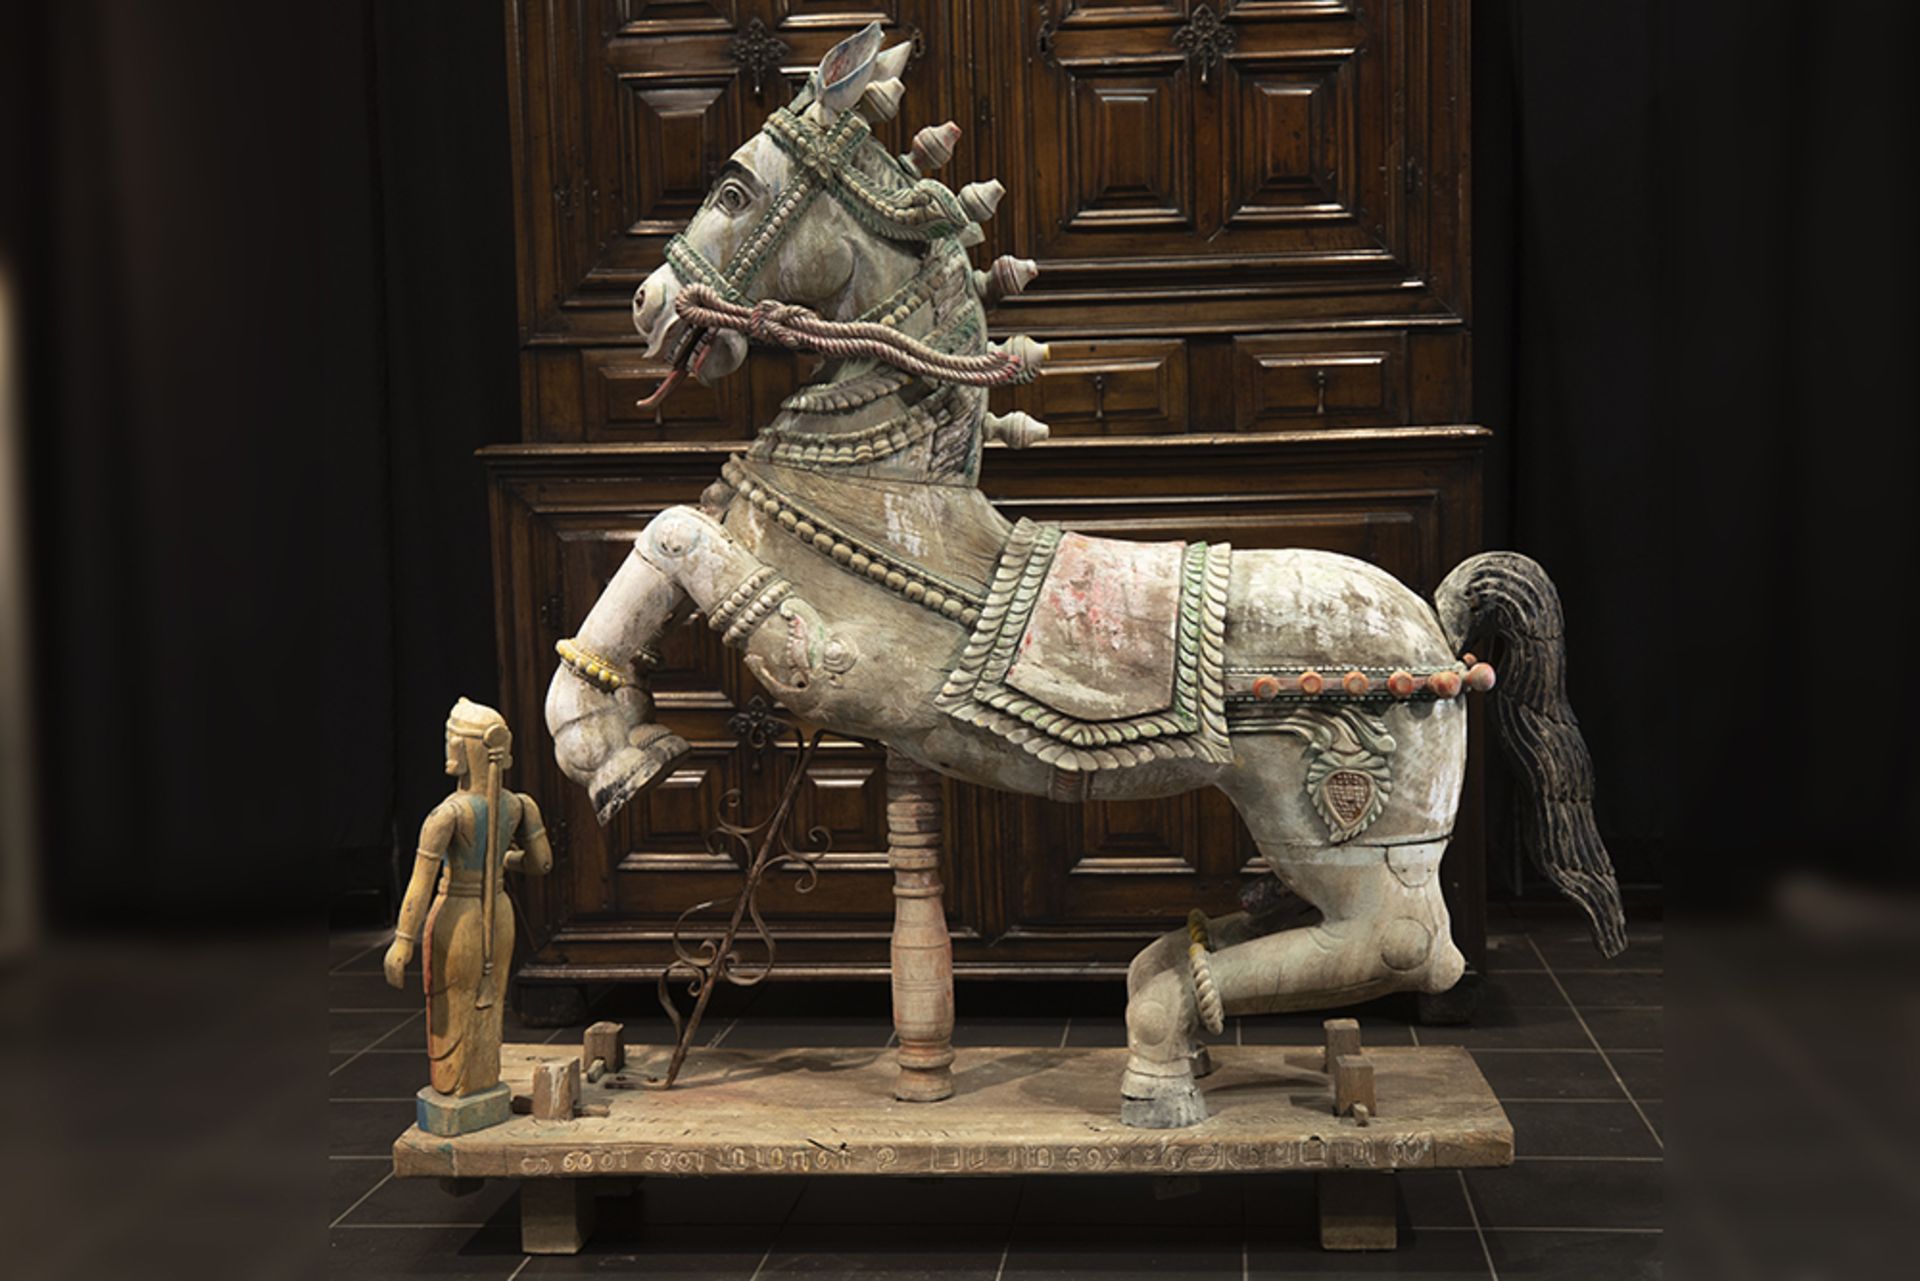 antique Indian "Horse" sculpture, part of a ceremonial Hindu carriage, in wood with remains of the - Image 3 of 3